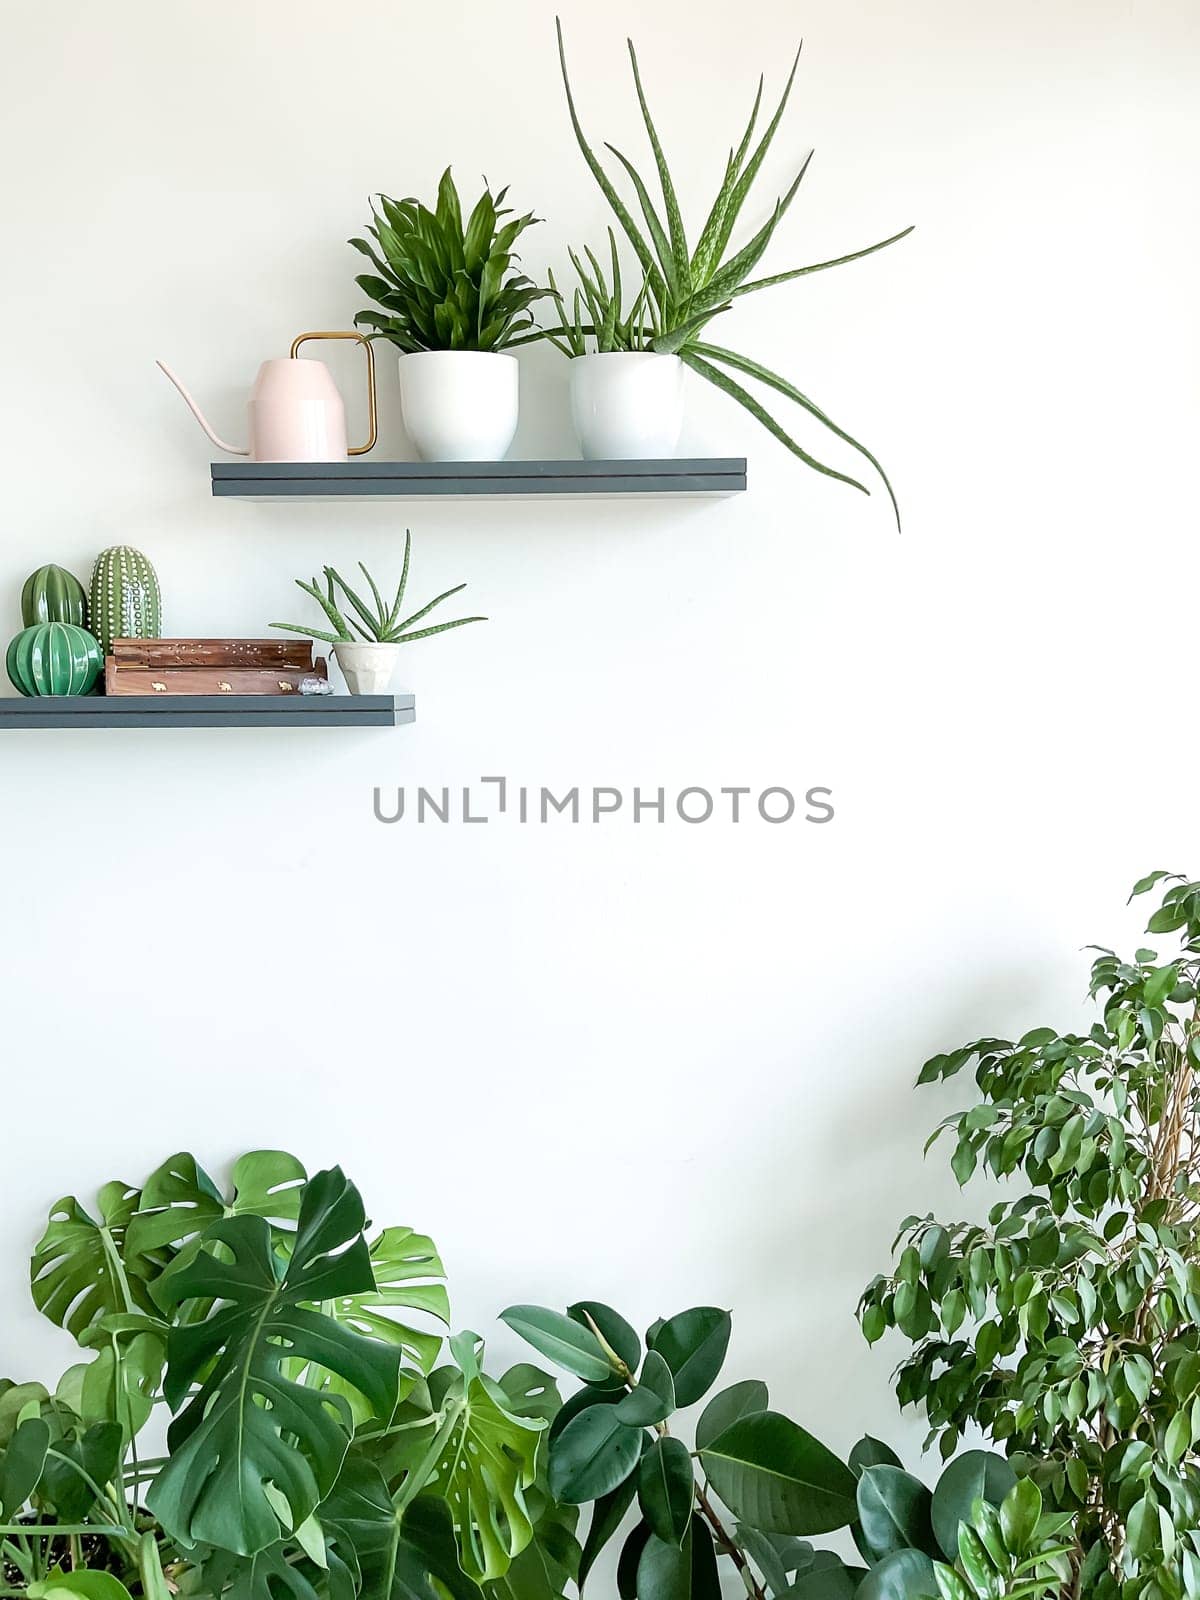 Monstera deliciosa, zamioculcas and ficus on white background. Shelves on the wall with plants, watering can and incense. Stylish and minimalistic urban jungle interior. Empty white wall, copy space